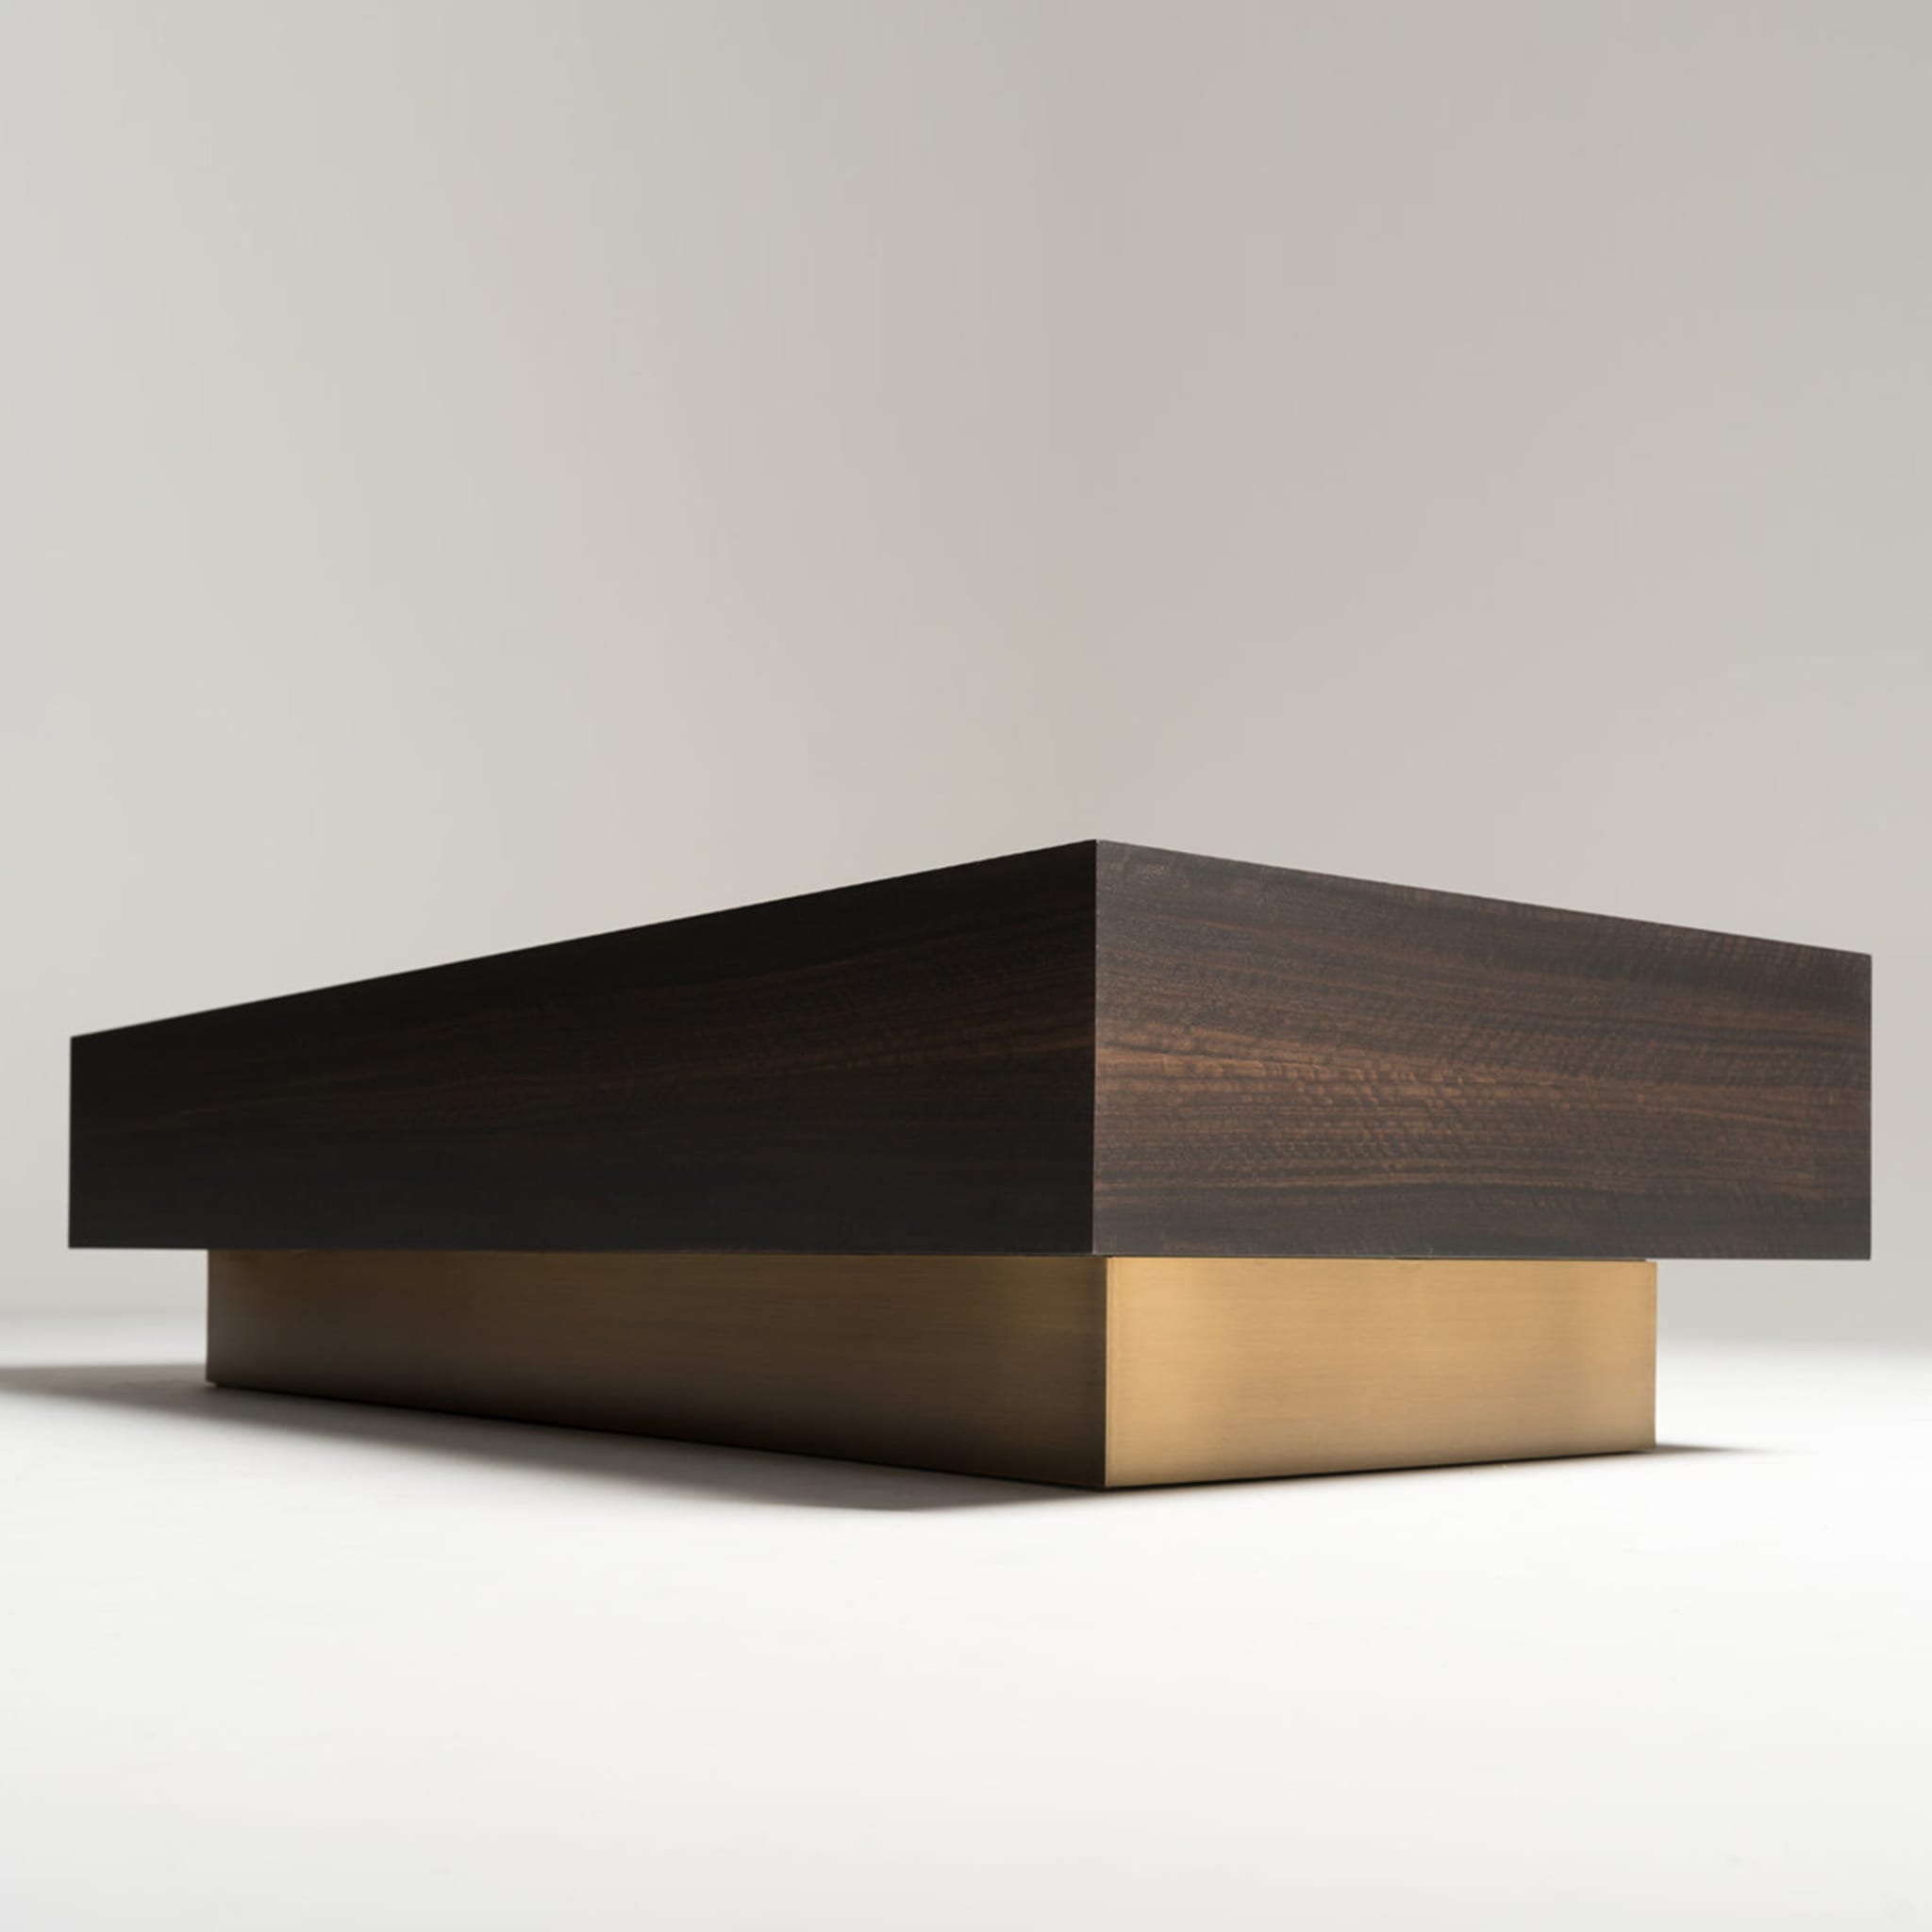 Cubo coffee table by Marco and Giulio Mantellassi - Alternative view 2